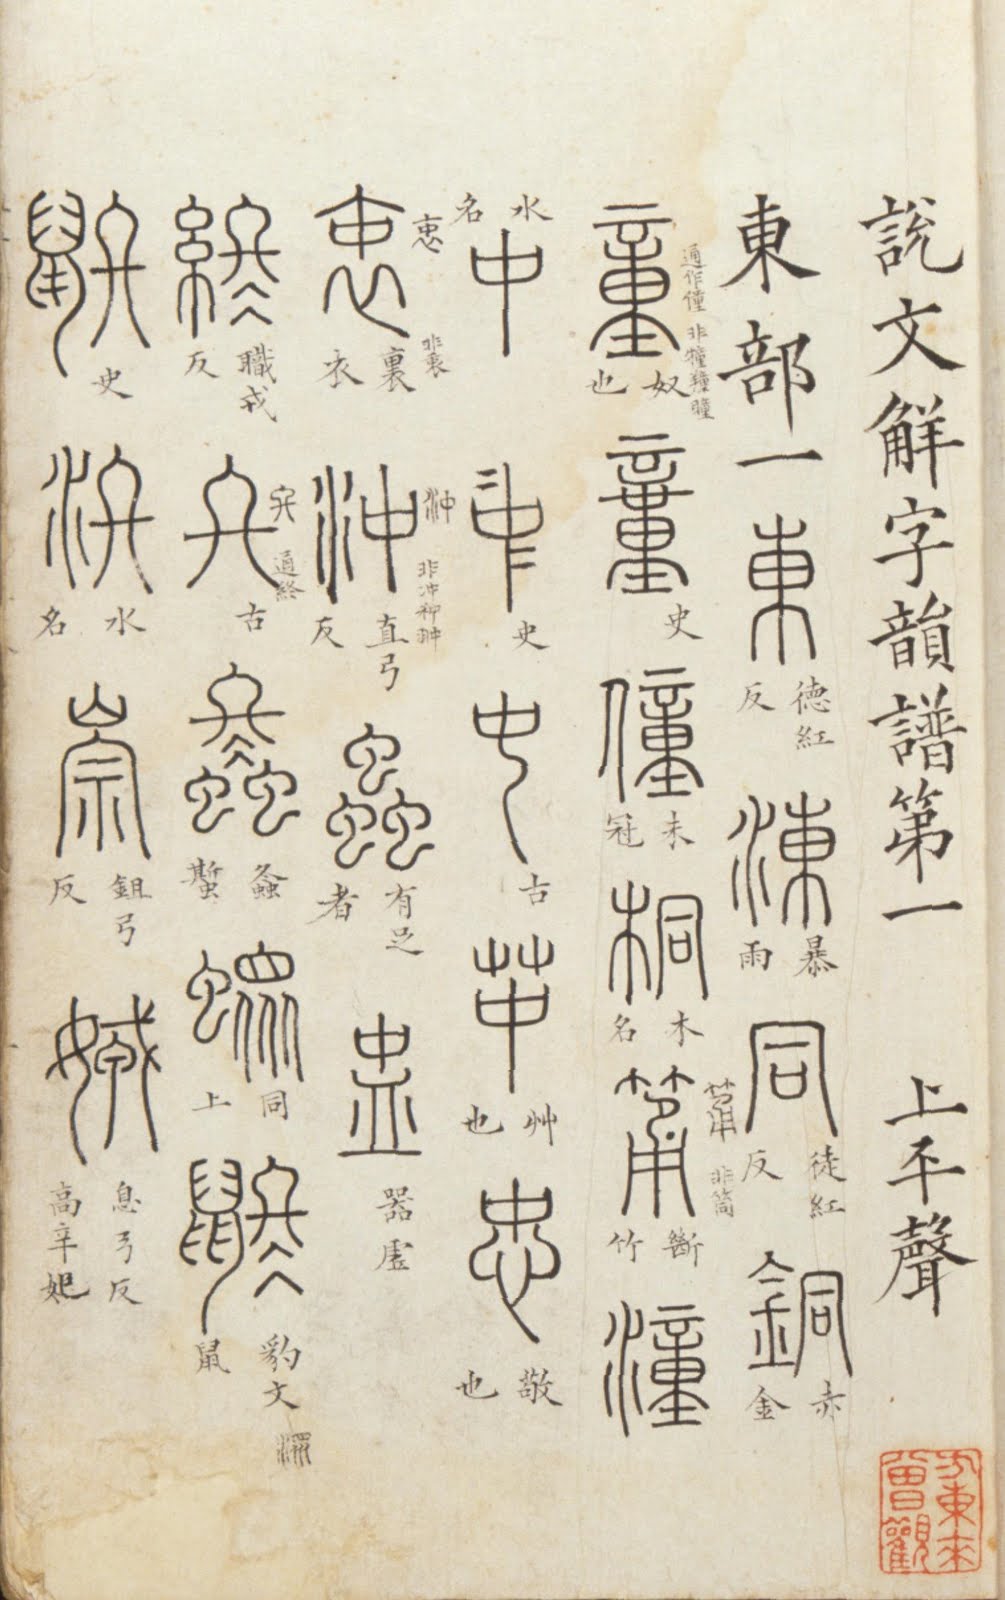 Simplified 简繁traditional The Chinese Scripts